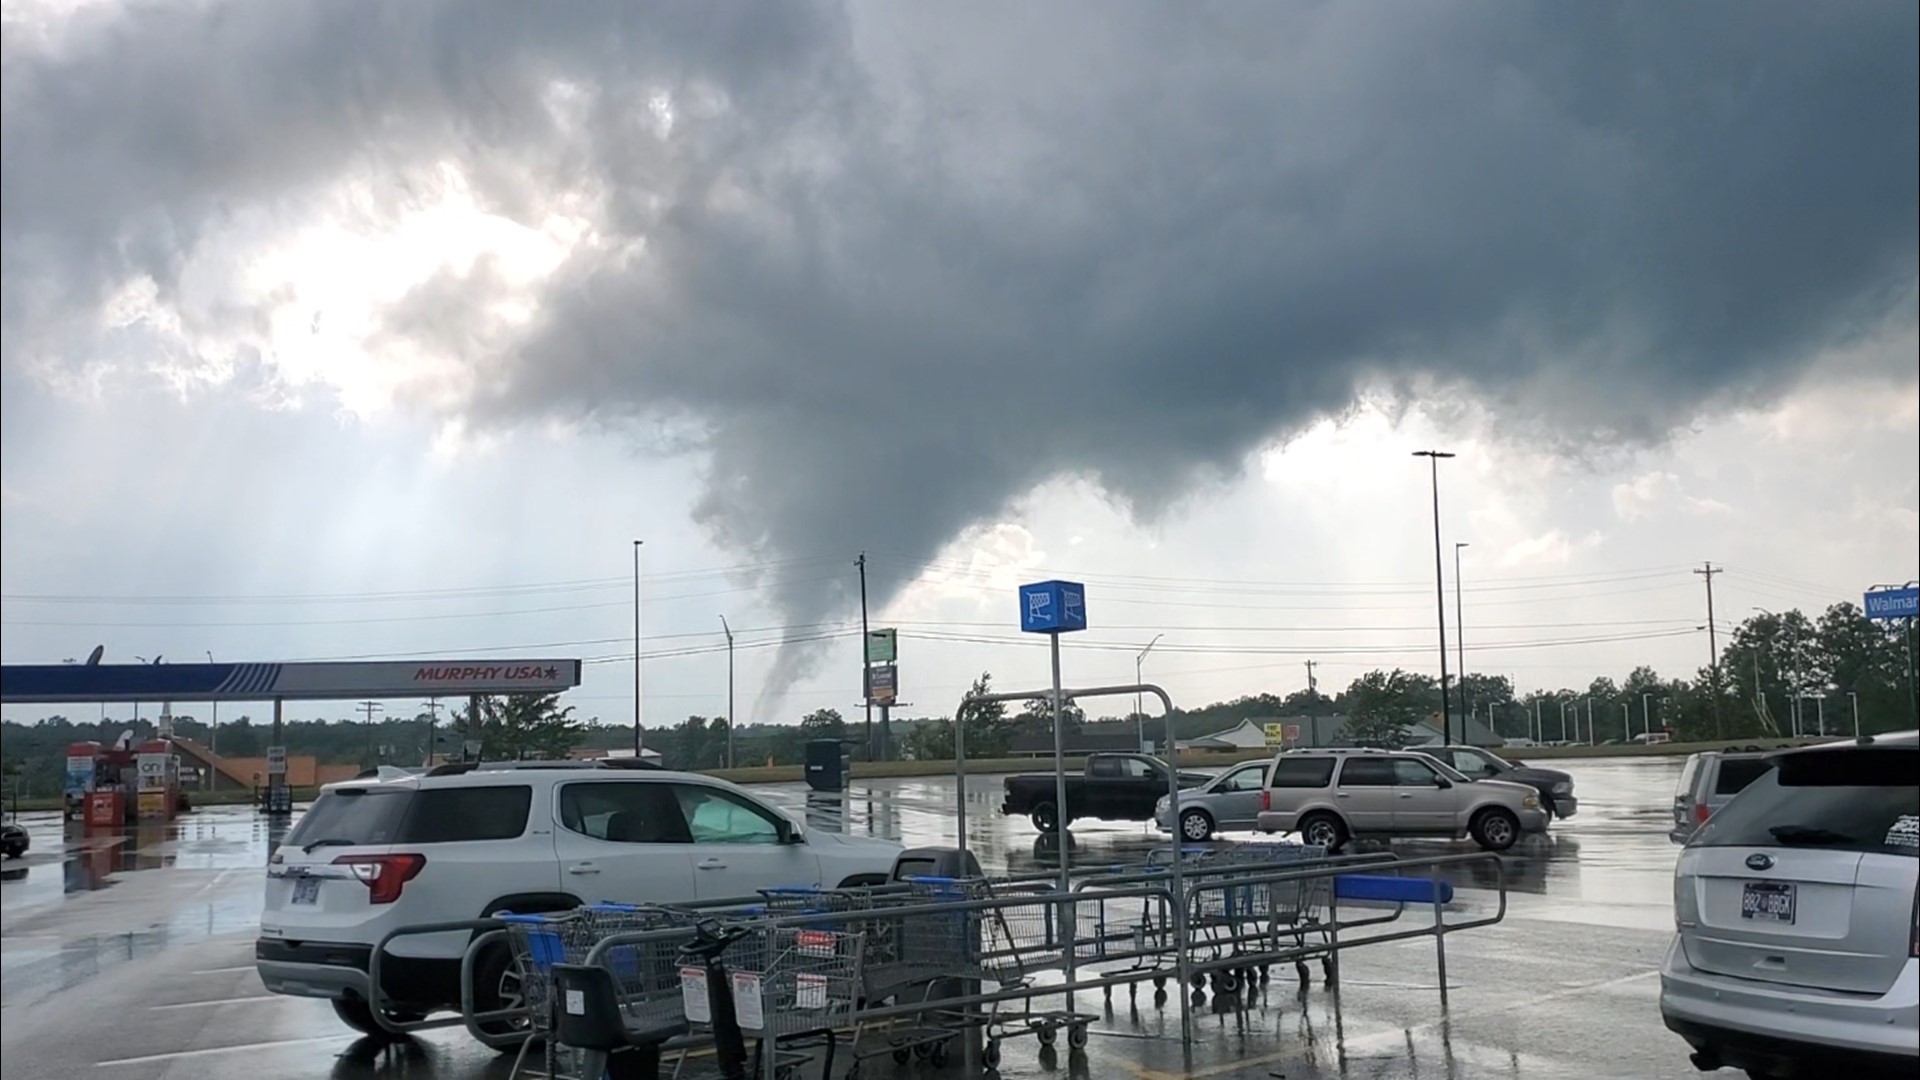 Larry Brummett shared this incredible video of a tornado forming near Crossville.